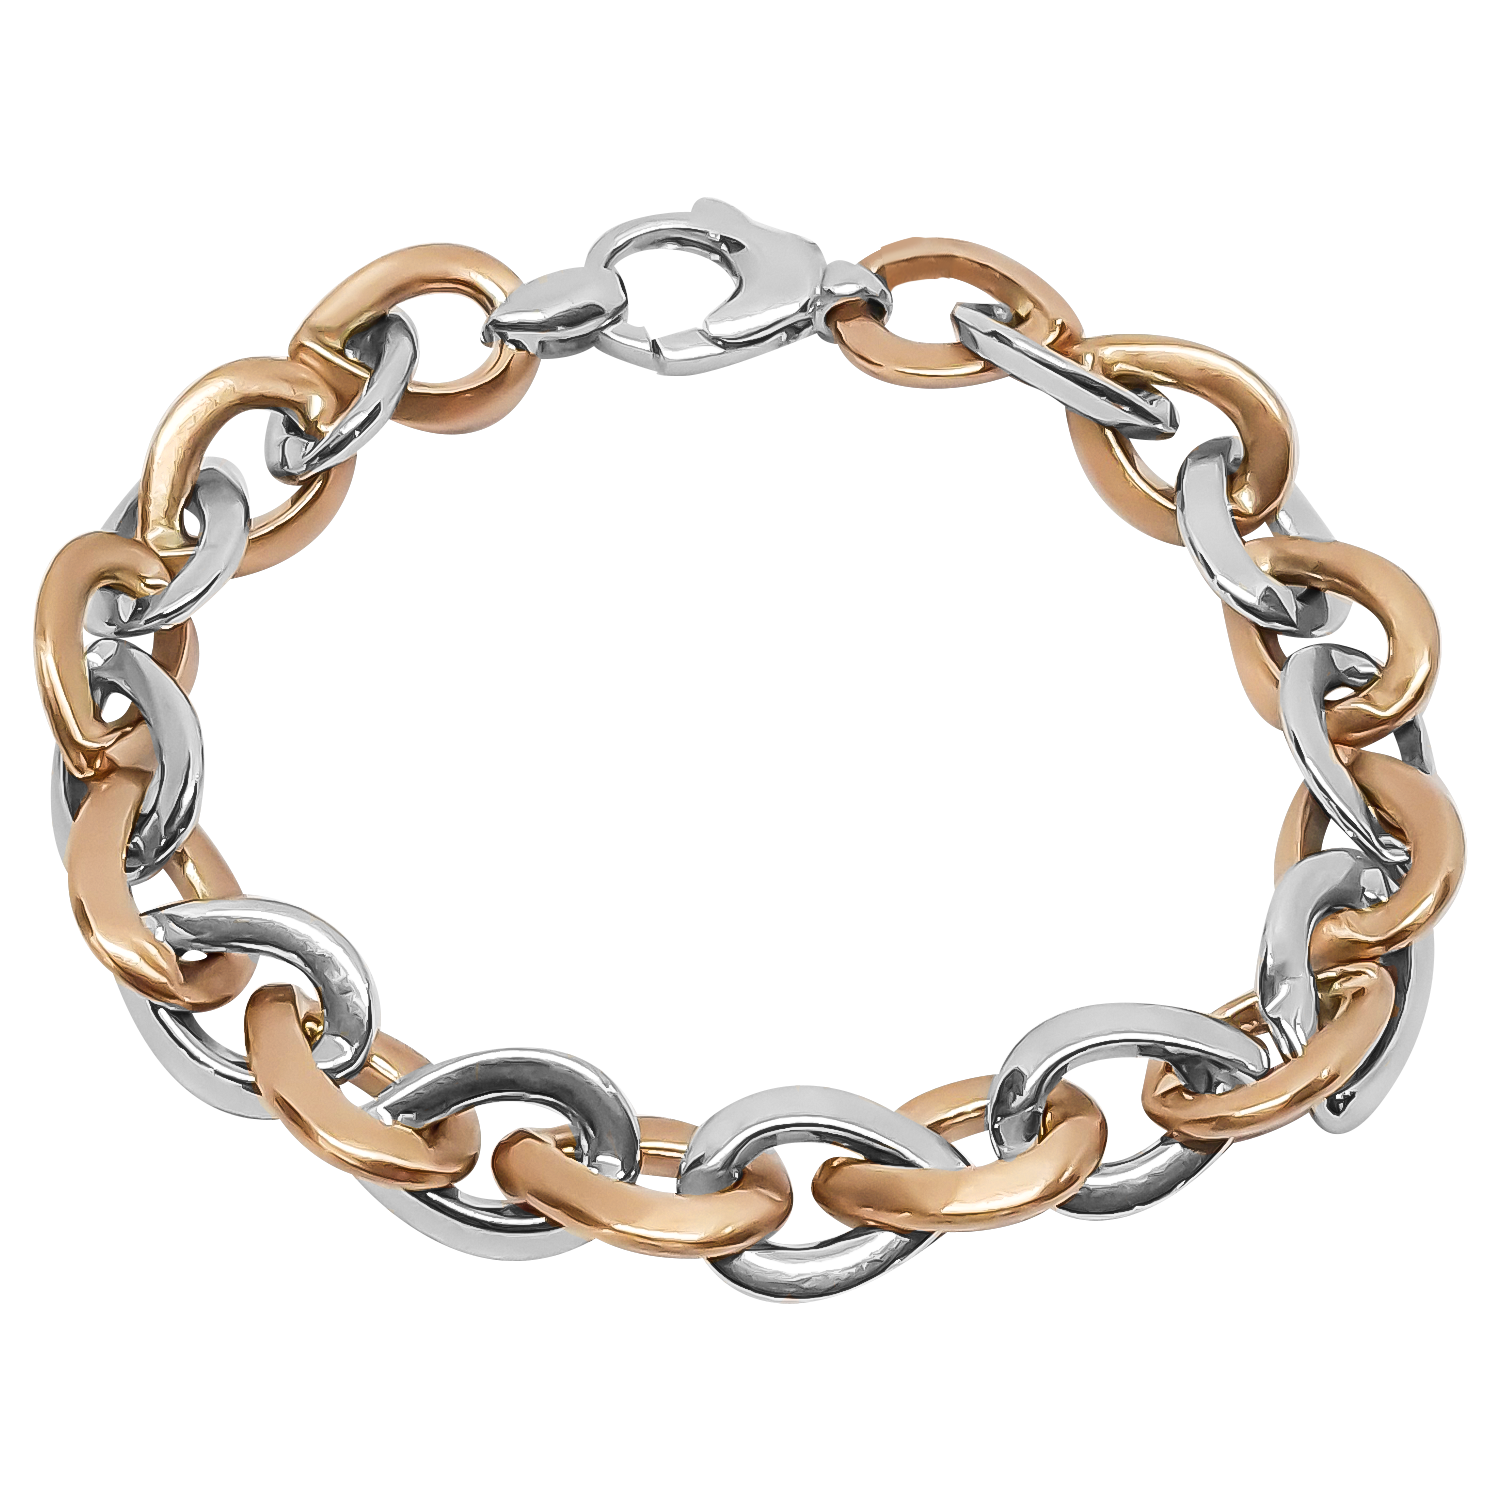 20cm Marquise Link Bracelet in 9ct Yellow Gold and Rose Gold.